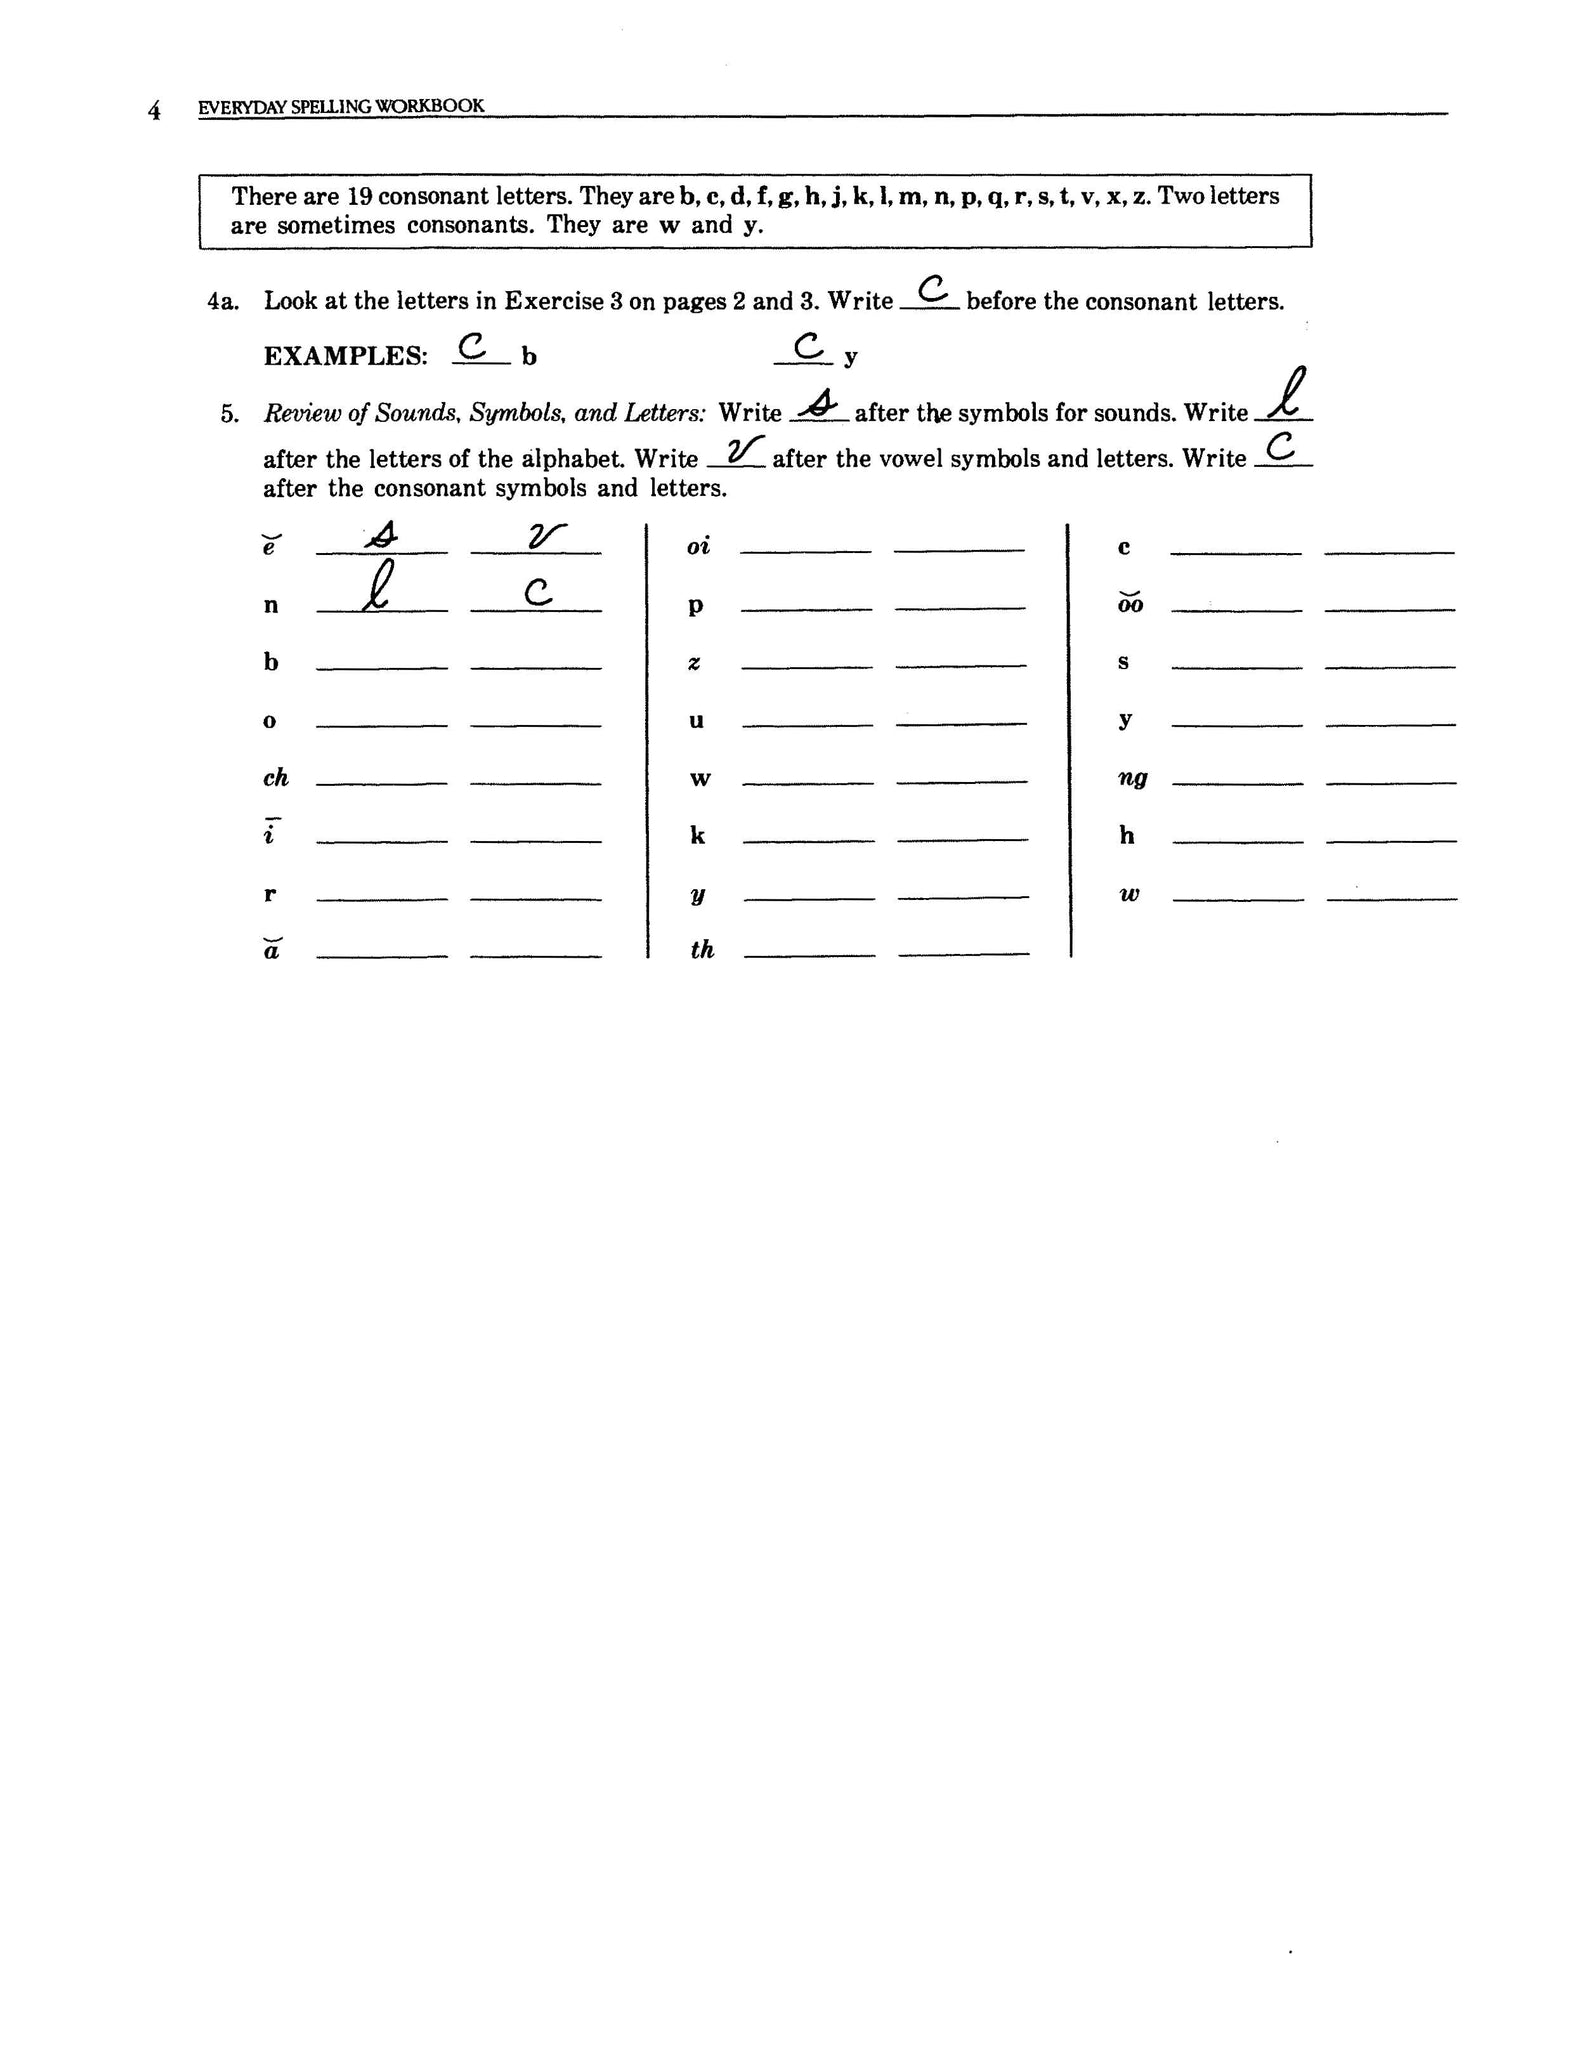 A-09.2 Do Traditional Student Text Exercises – Work/Life English